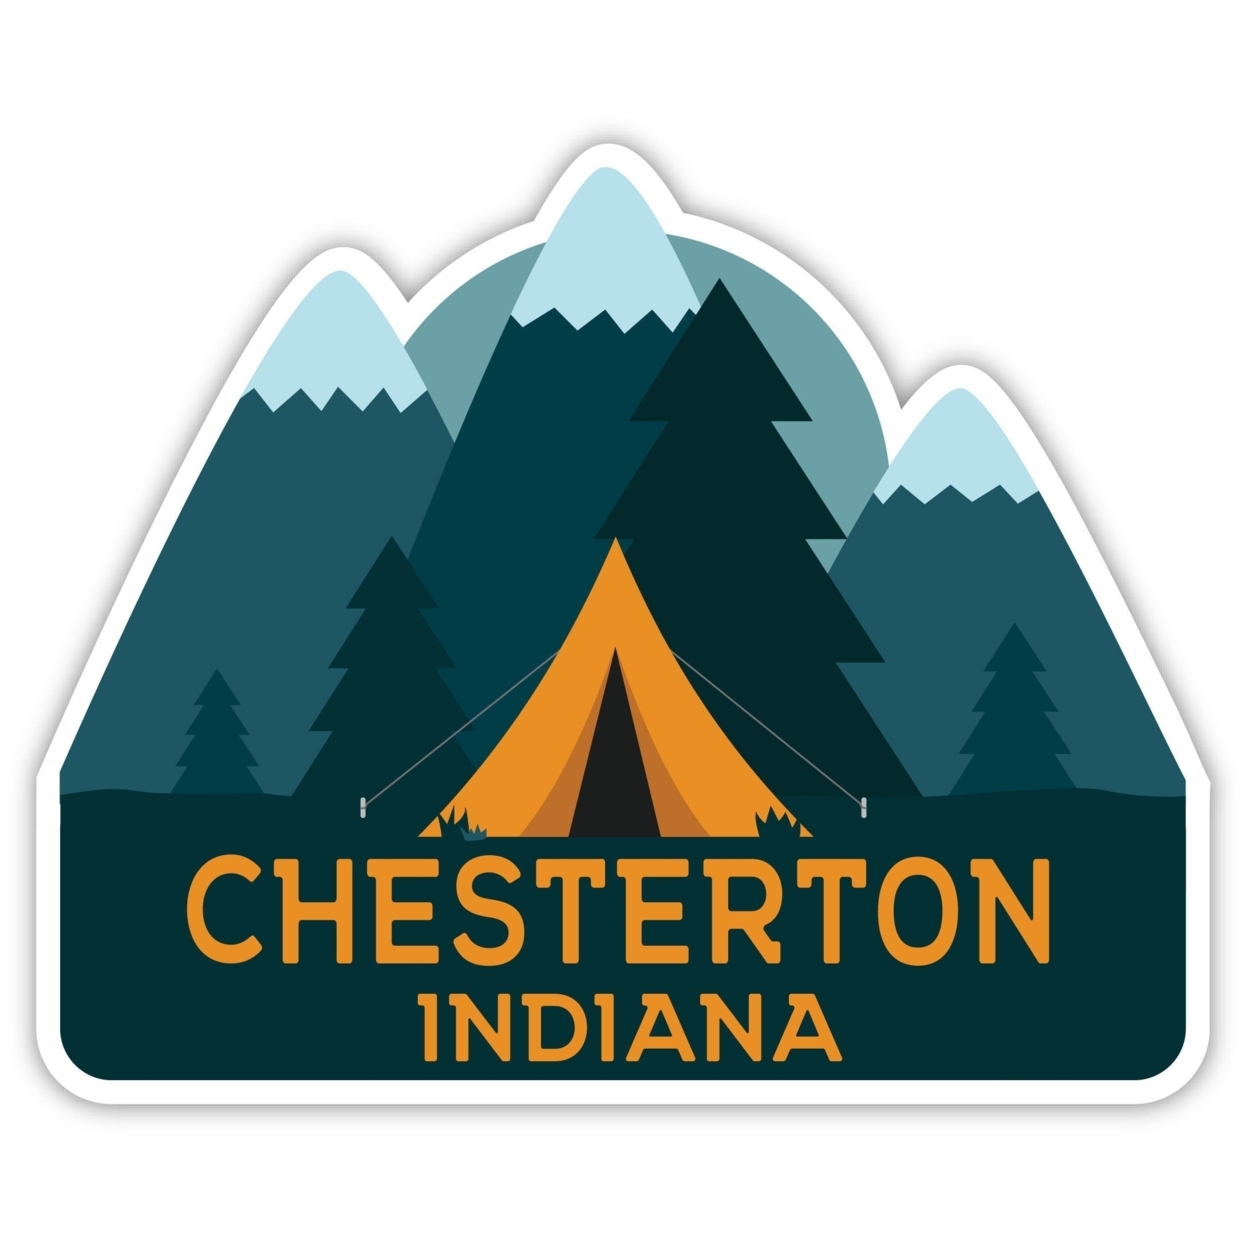 Chesterton Indiana Souvenir Decorative Stickers (Choose Theme And Size) - 4-Pack, 12-Inch, Bear